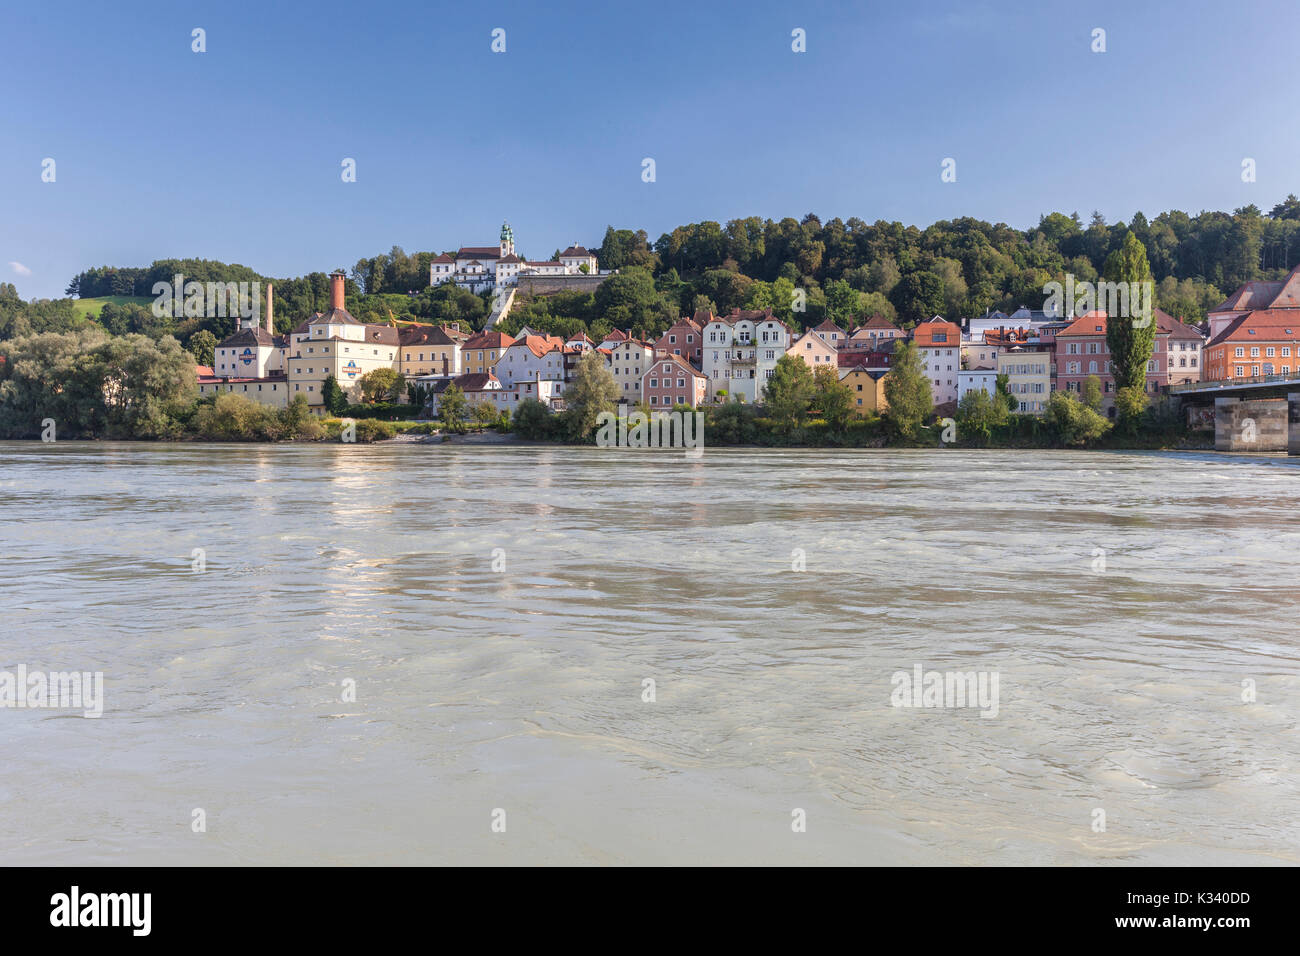 Typical houses of the city framed by river and blue sky Passau Lower Bavaria Germany Europe Stock Photo